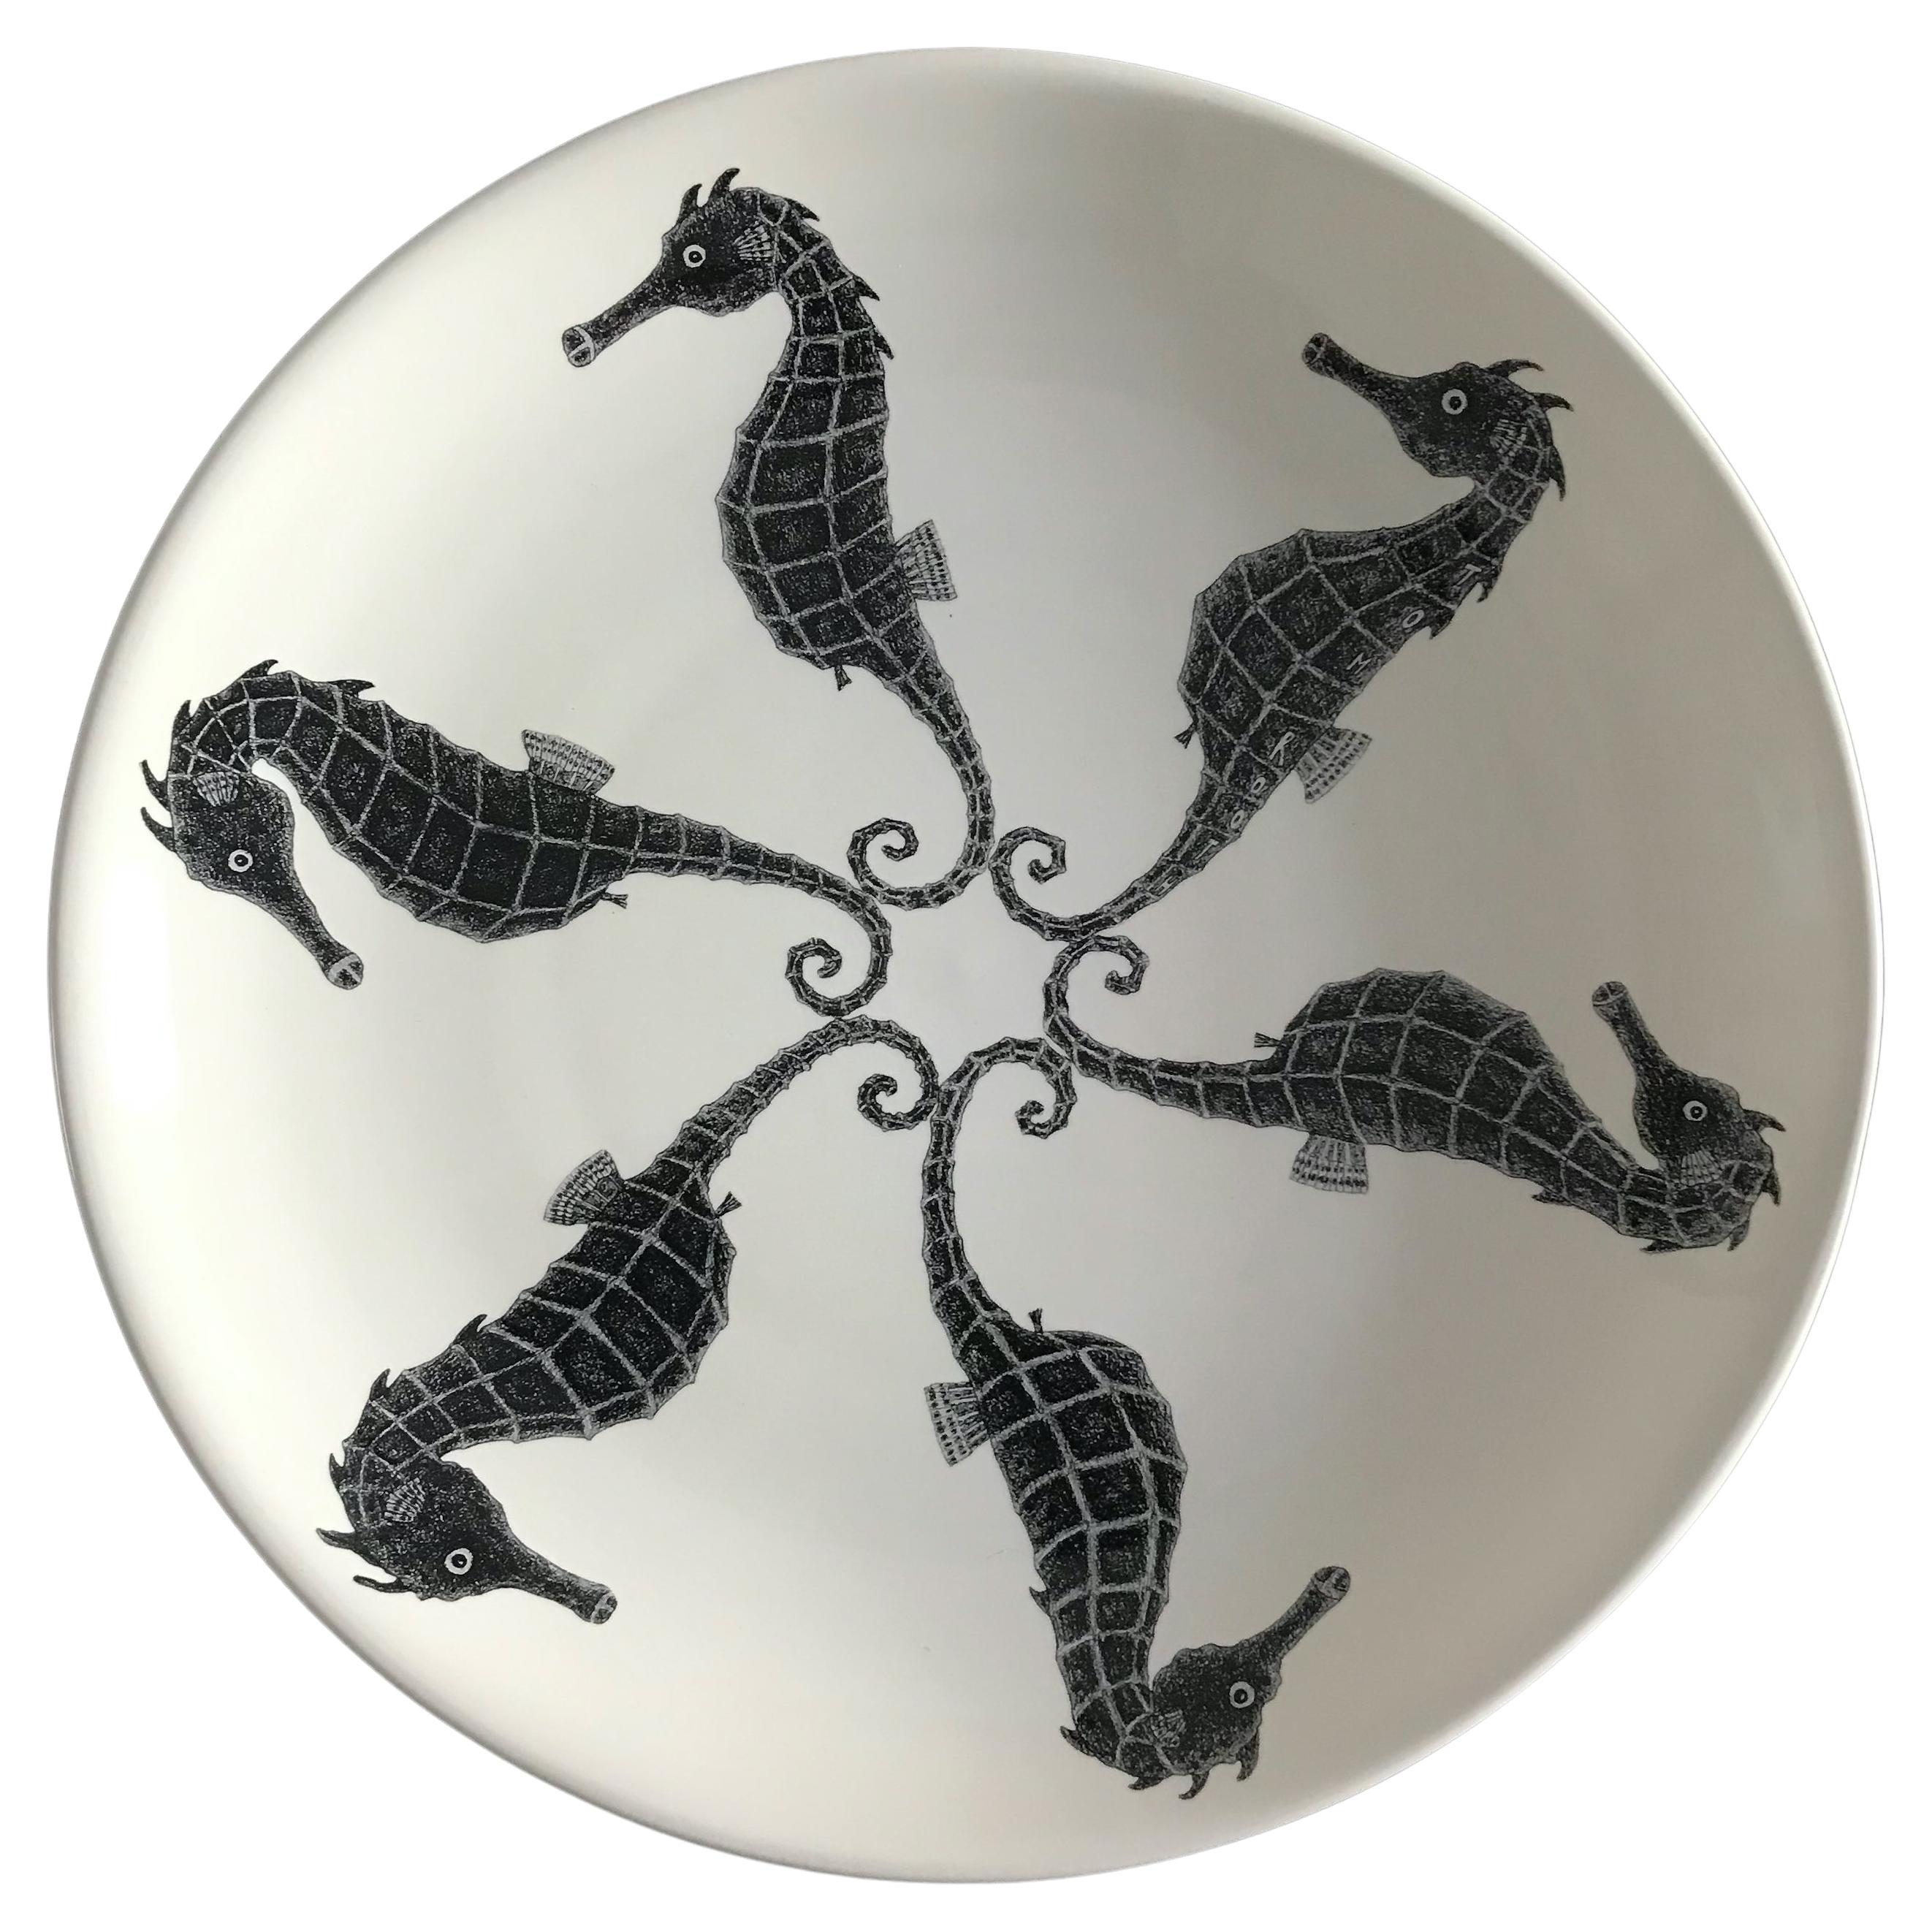 Circling Seahorses, by Tom Rooth For Sale